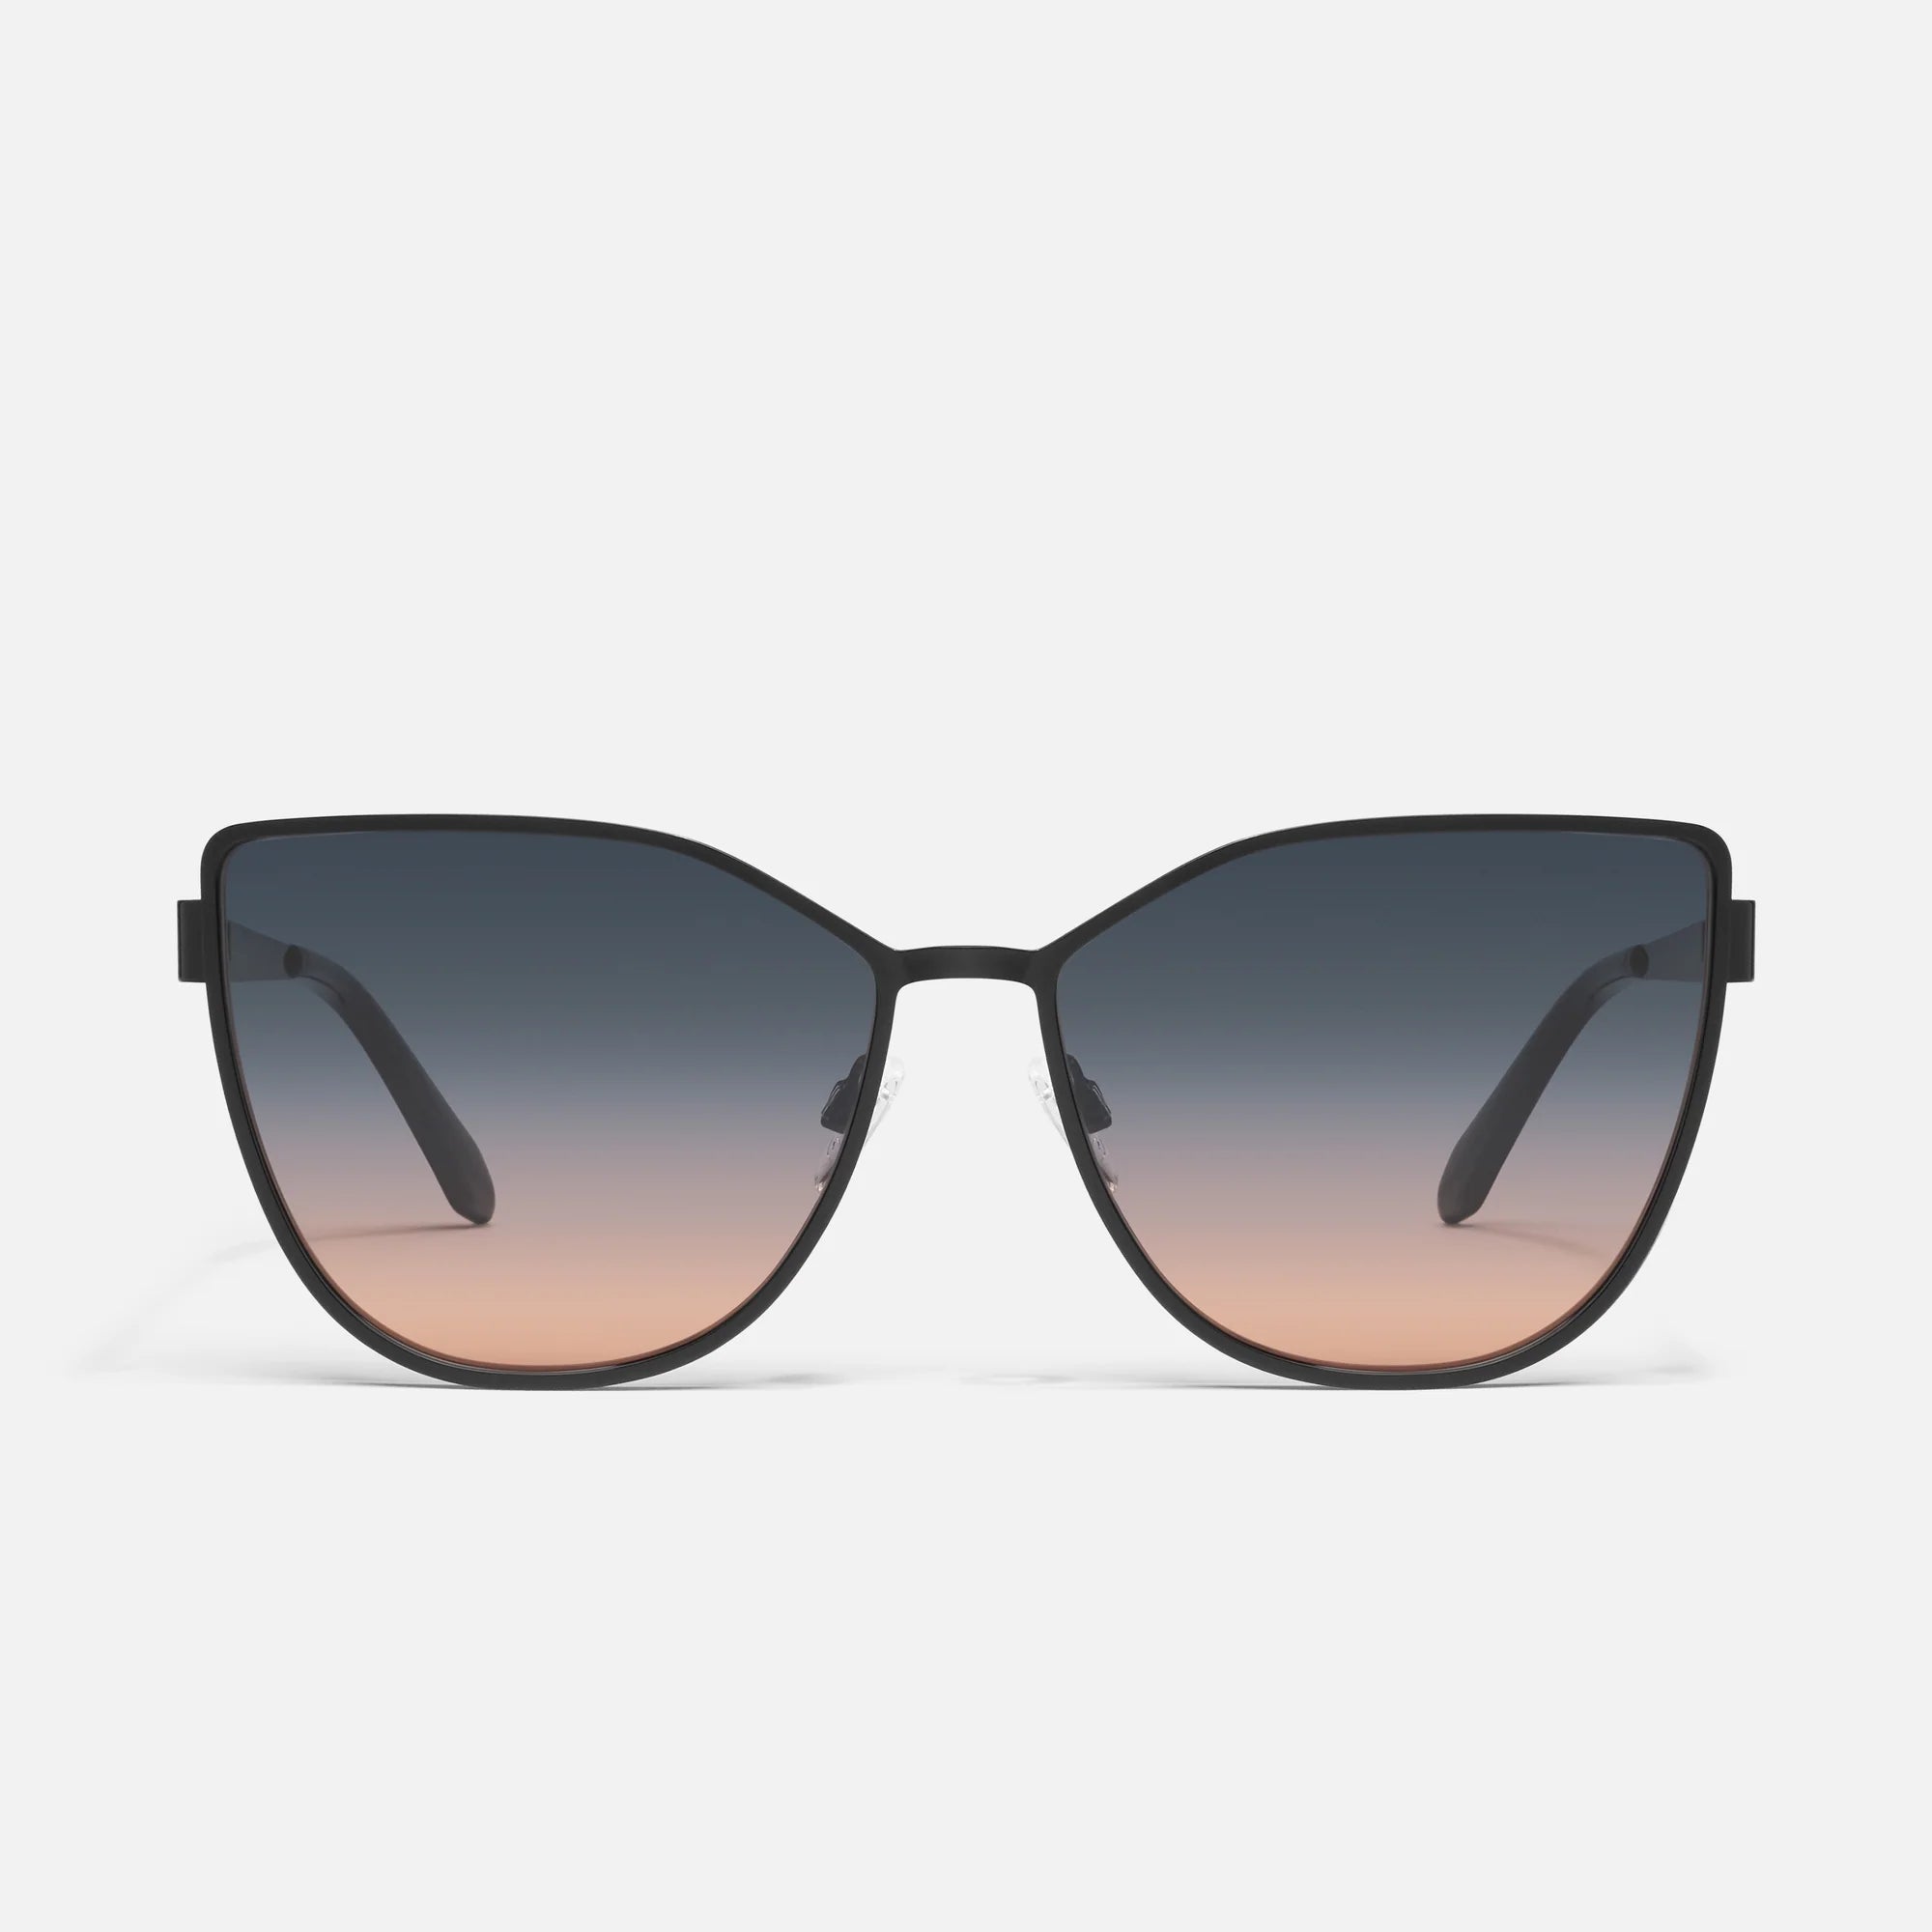 QUAY - In Pursuit - Black Frame / Smoke To Coral Lens